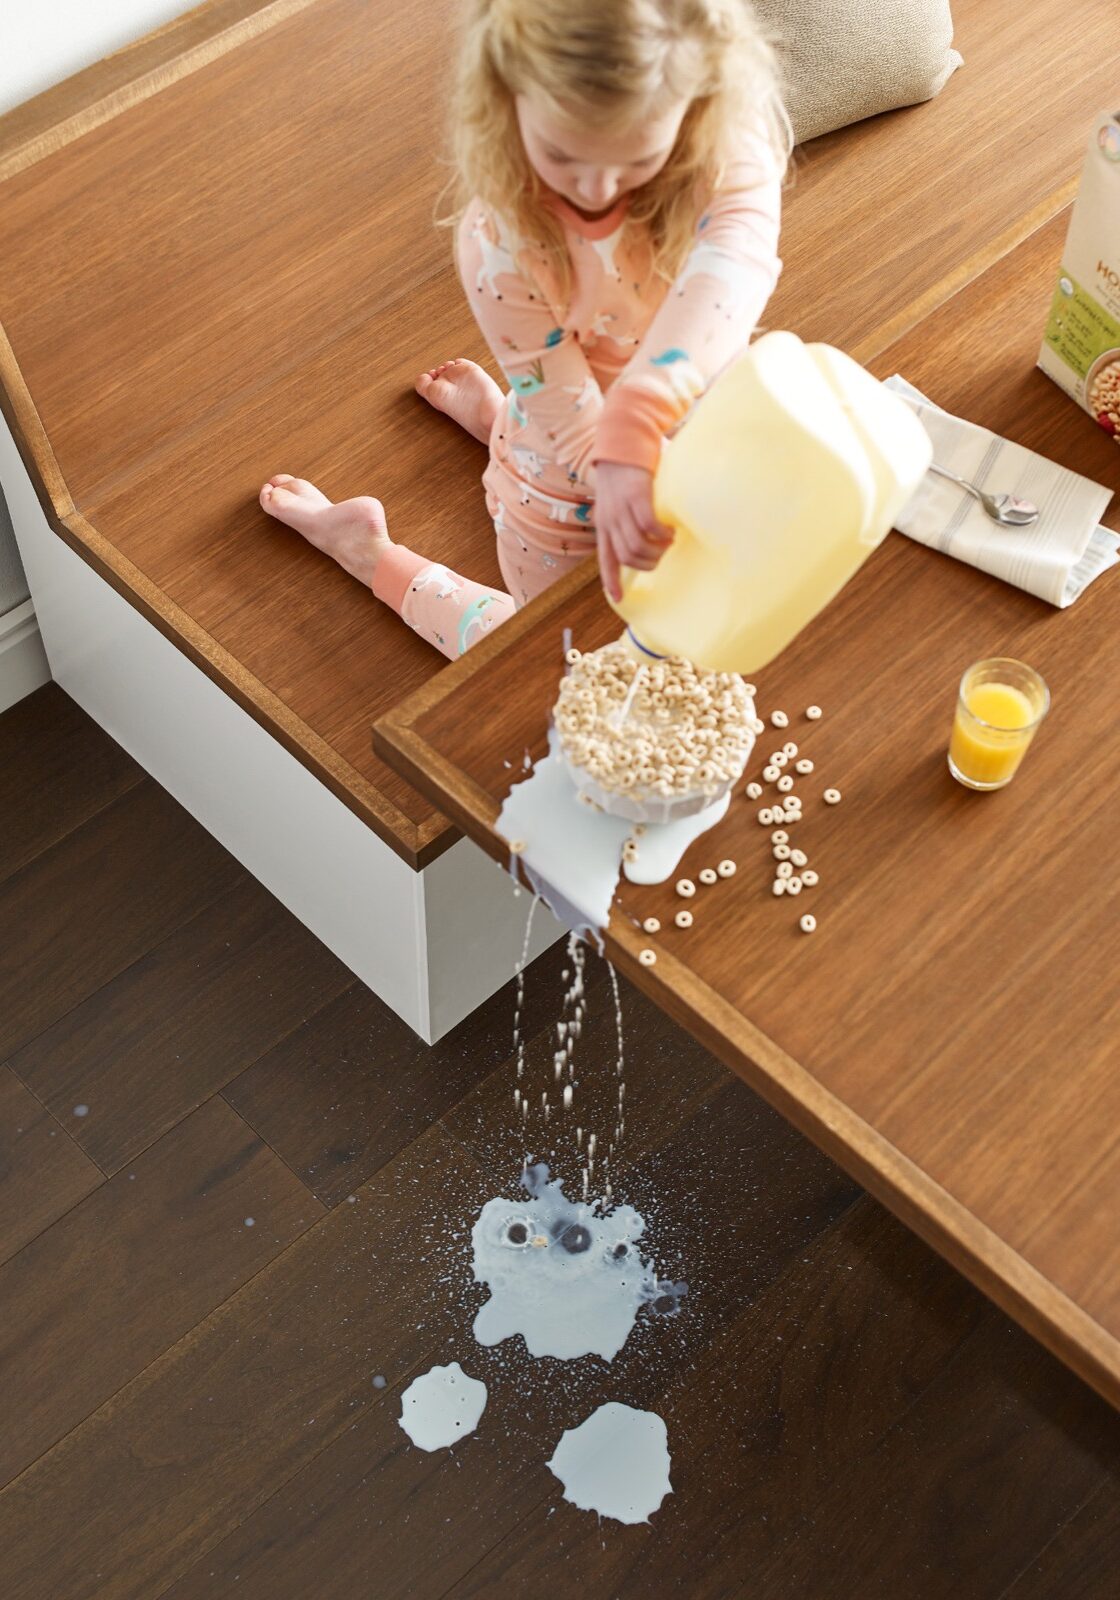 Milk spill cleaning | Floor to Ceiling Hayward